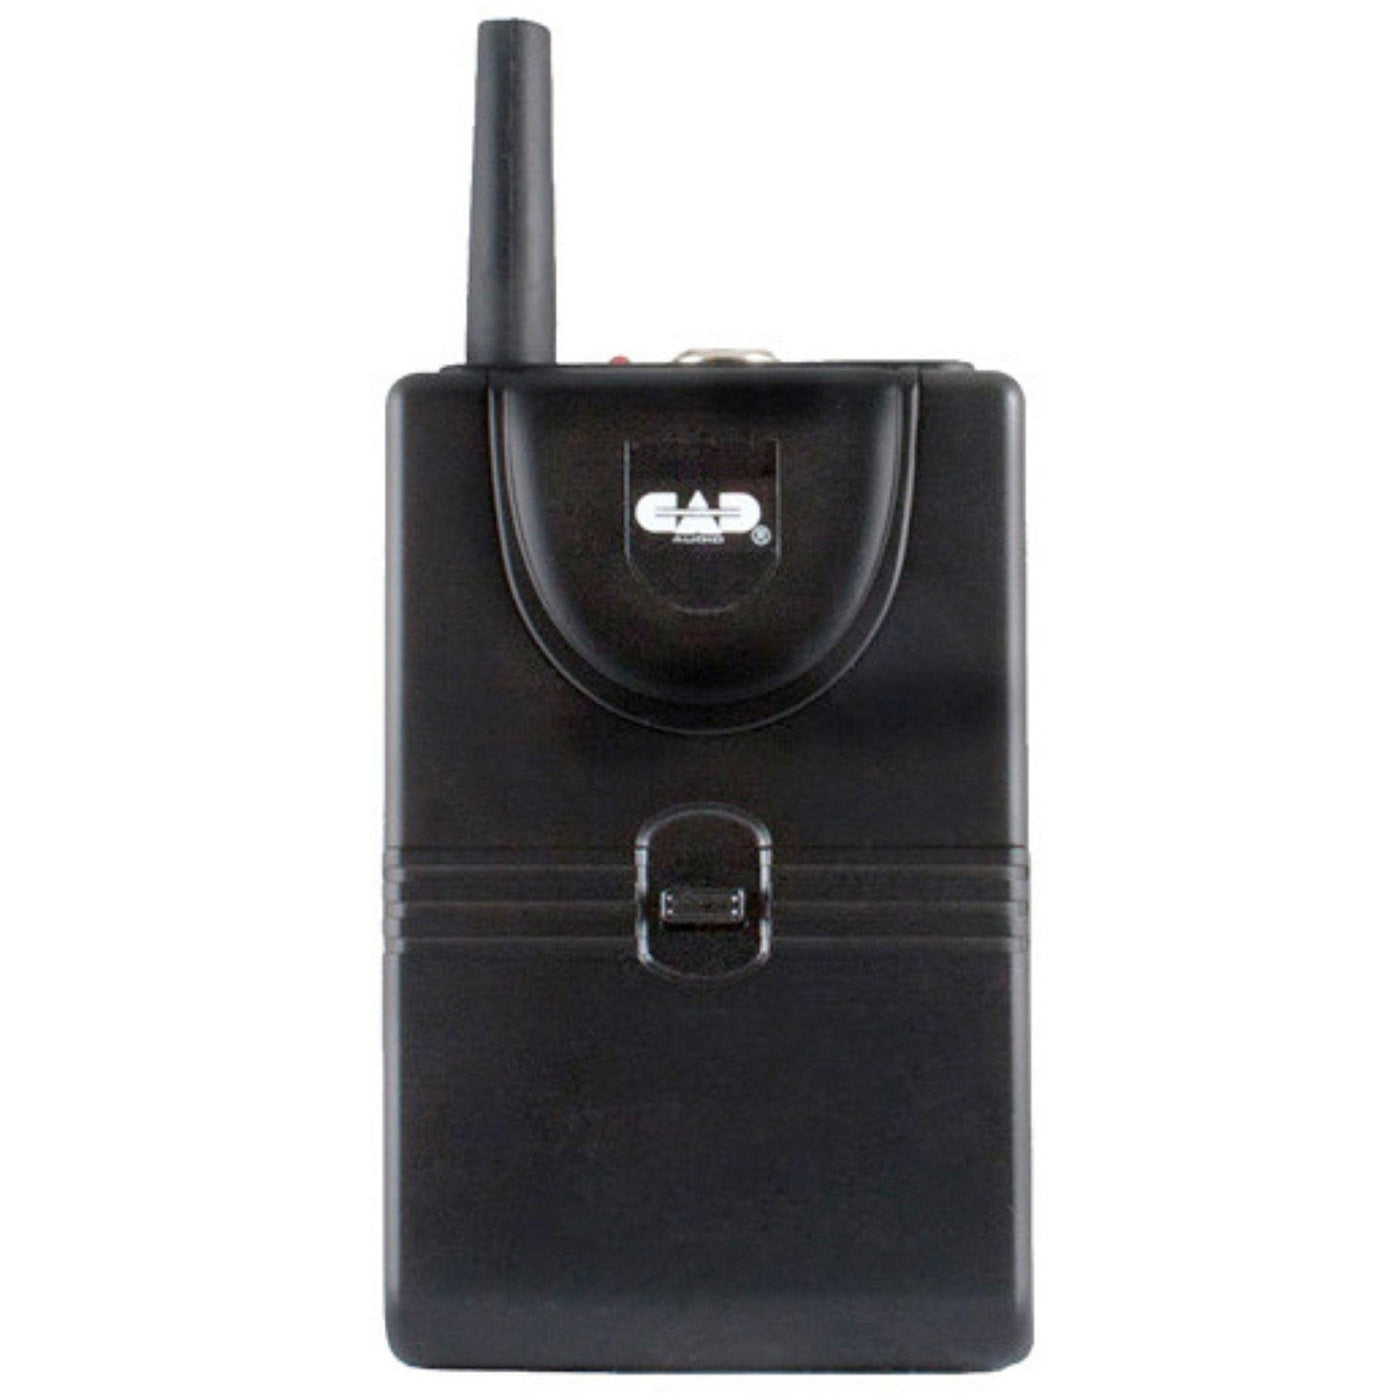 CAD Audio TXBGXLVH VHF Bodypack Transmitter for GXLV Wireless System with H Frequency Band